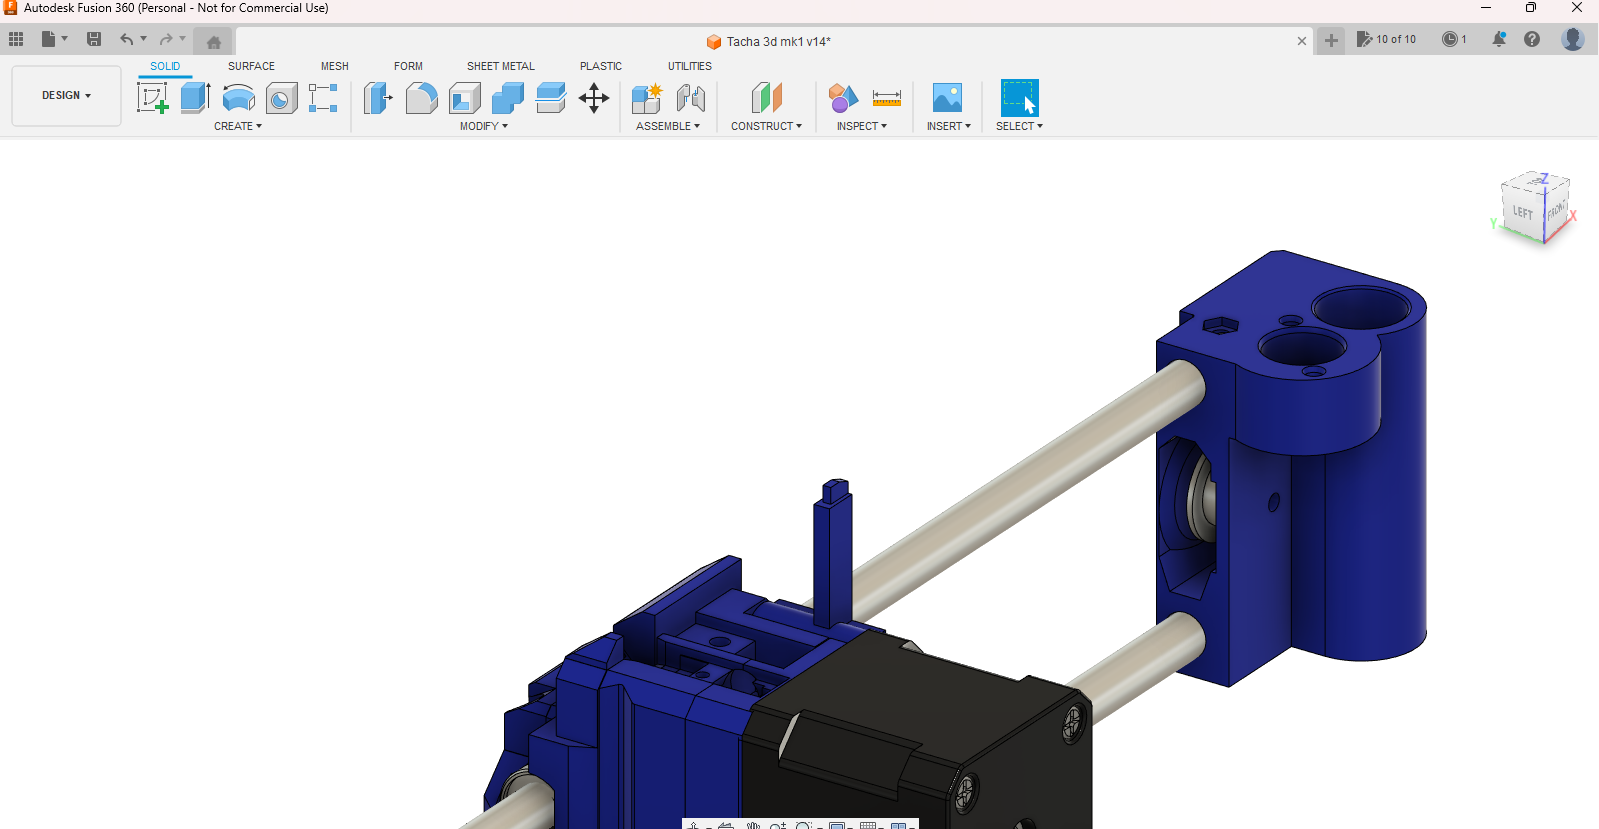 Autodesk Fusion 360 (Personal - Not for Commercial Use) 6_30_2023 9_07_51 PM.png